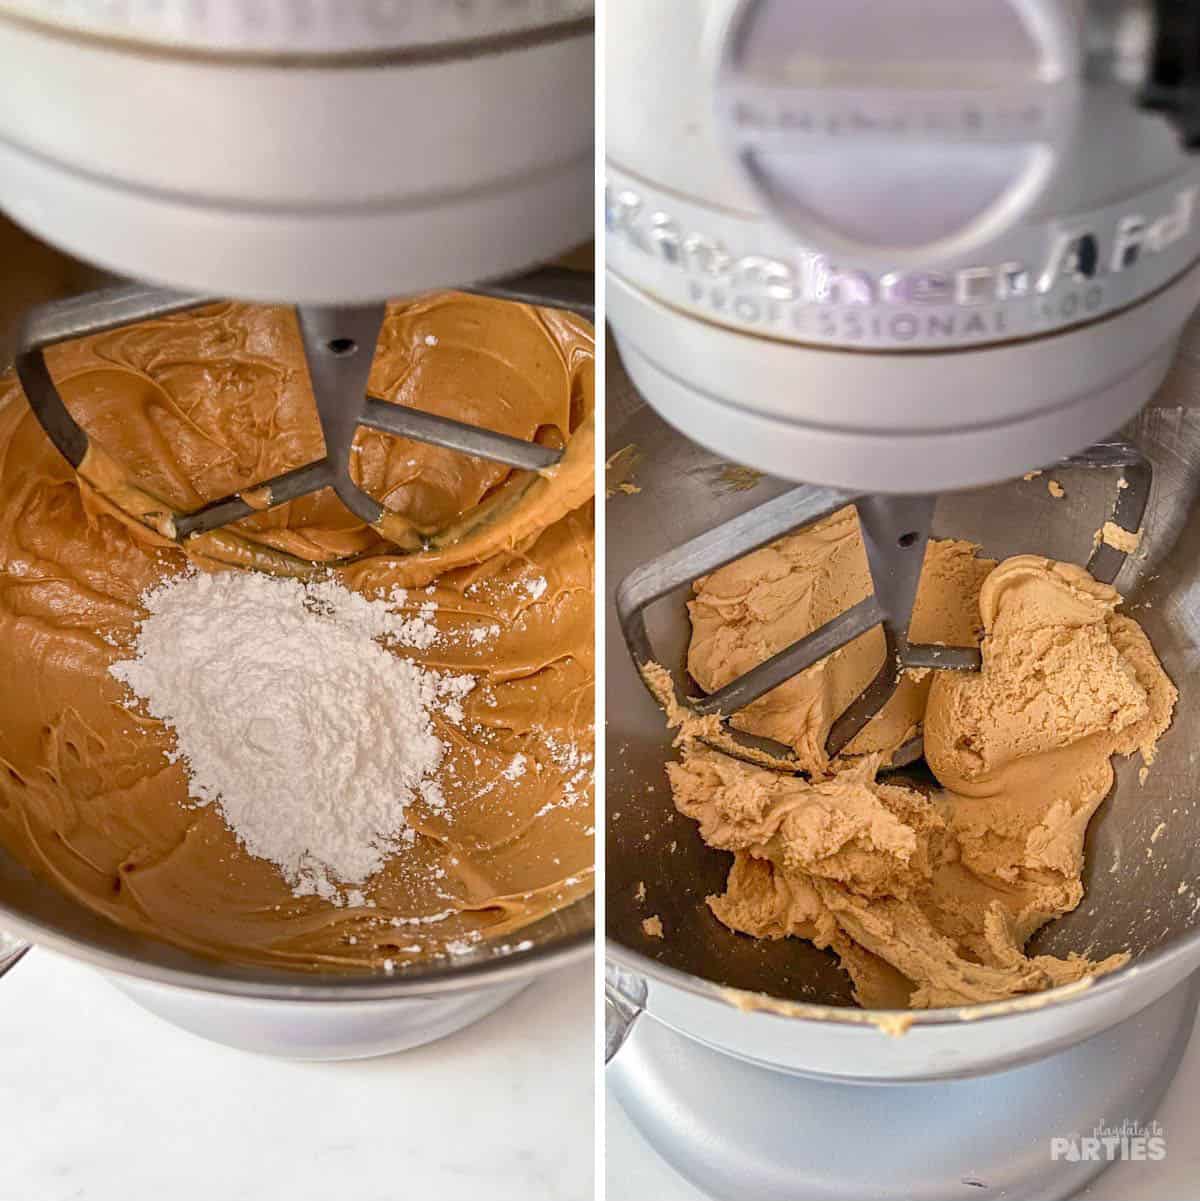 Mixing peanut butter and powdered sugar